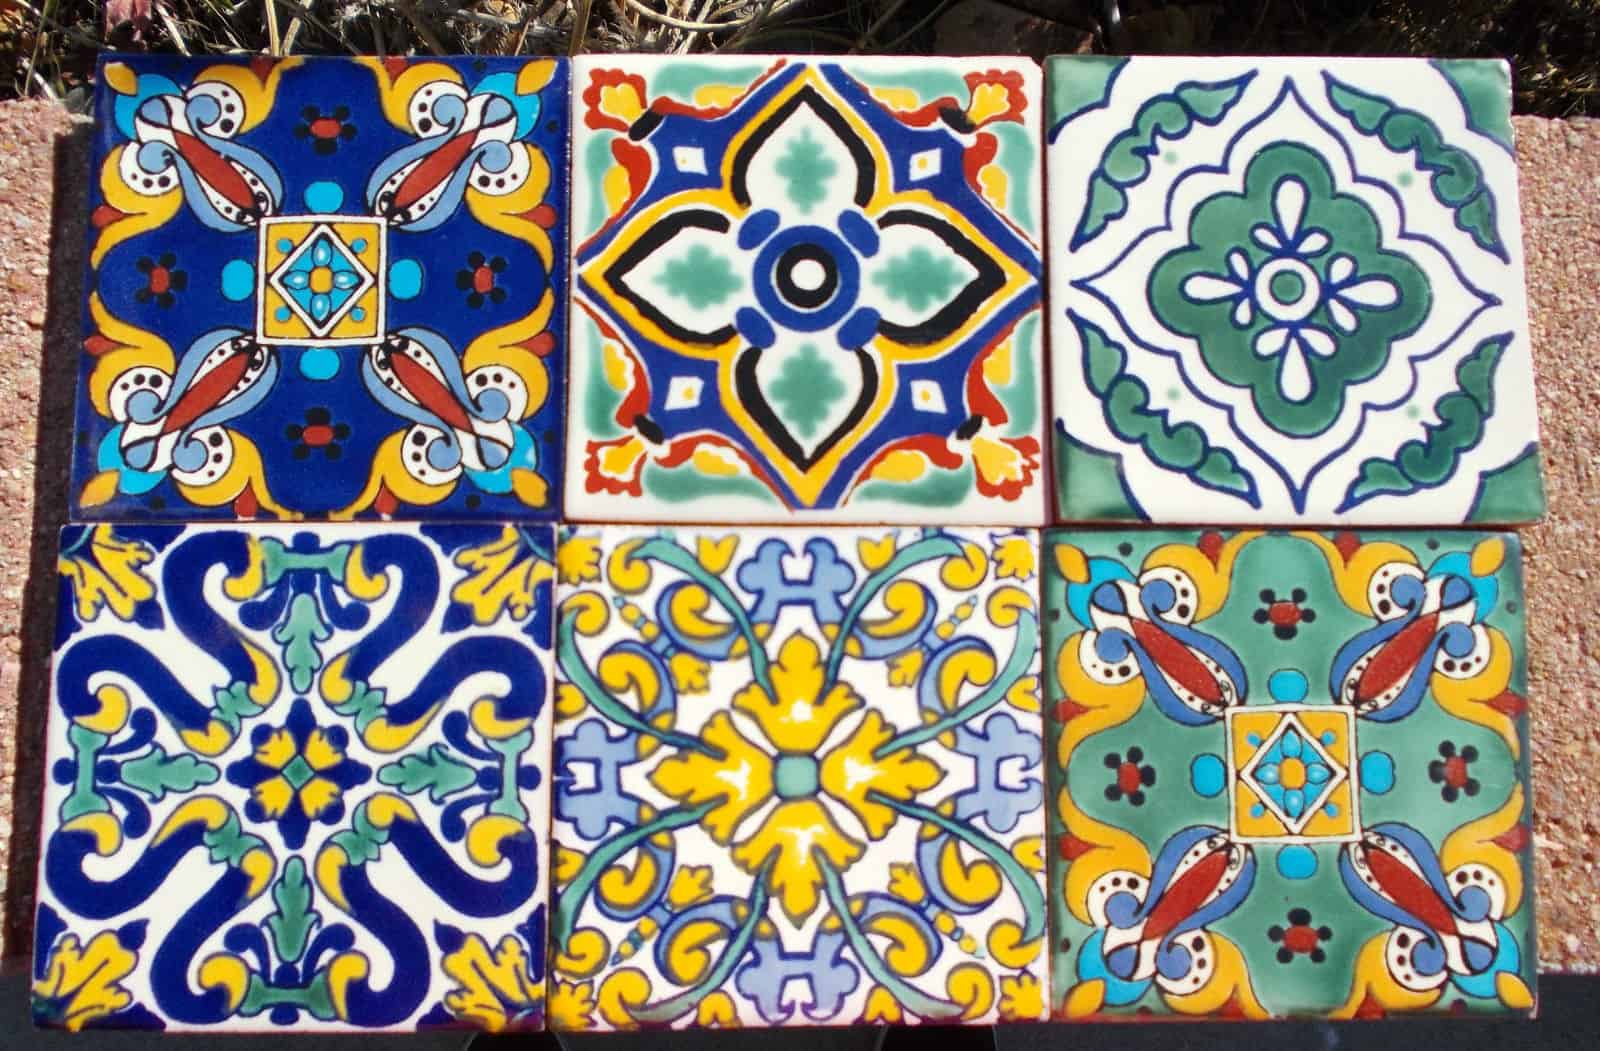 Hand-painted decorative tiles